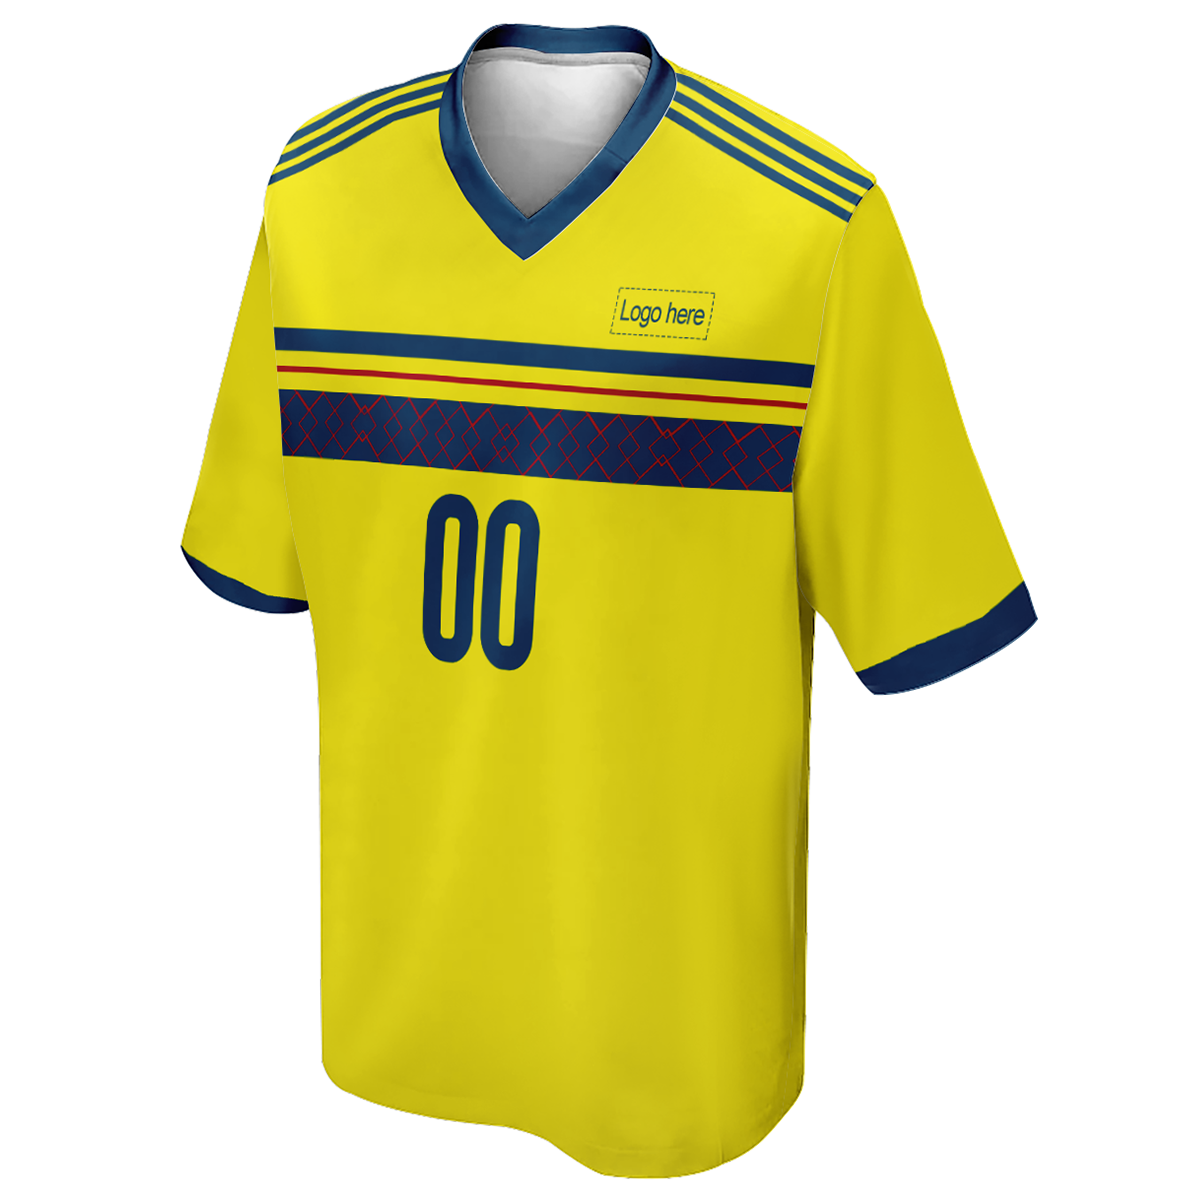 Men's Stitched Sweden World Cup Custom Soccer Jersey With Name